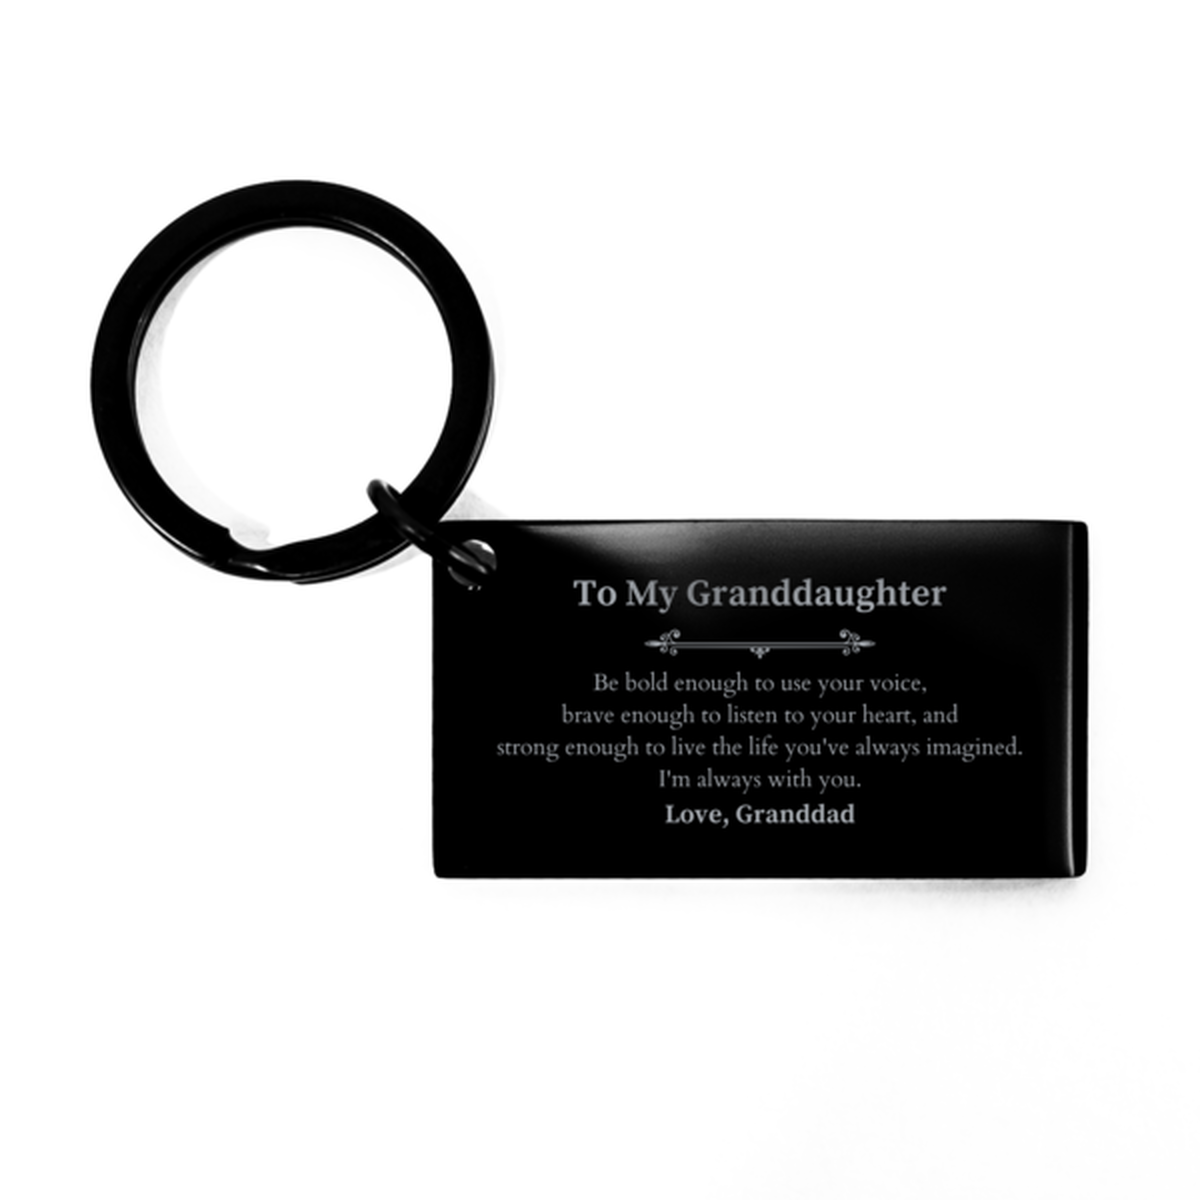 Keepsake Granddaughter Keychain Gift Idea Graduation Christmas Birthday Granddaughter from Granddad, Granddaughter Be bold enough to use your voice, brave enough to listen to your heart. Love, Granddad